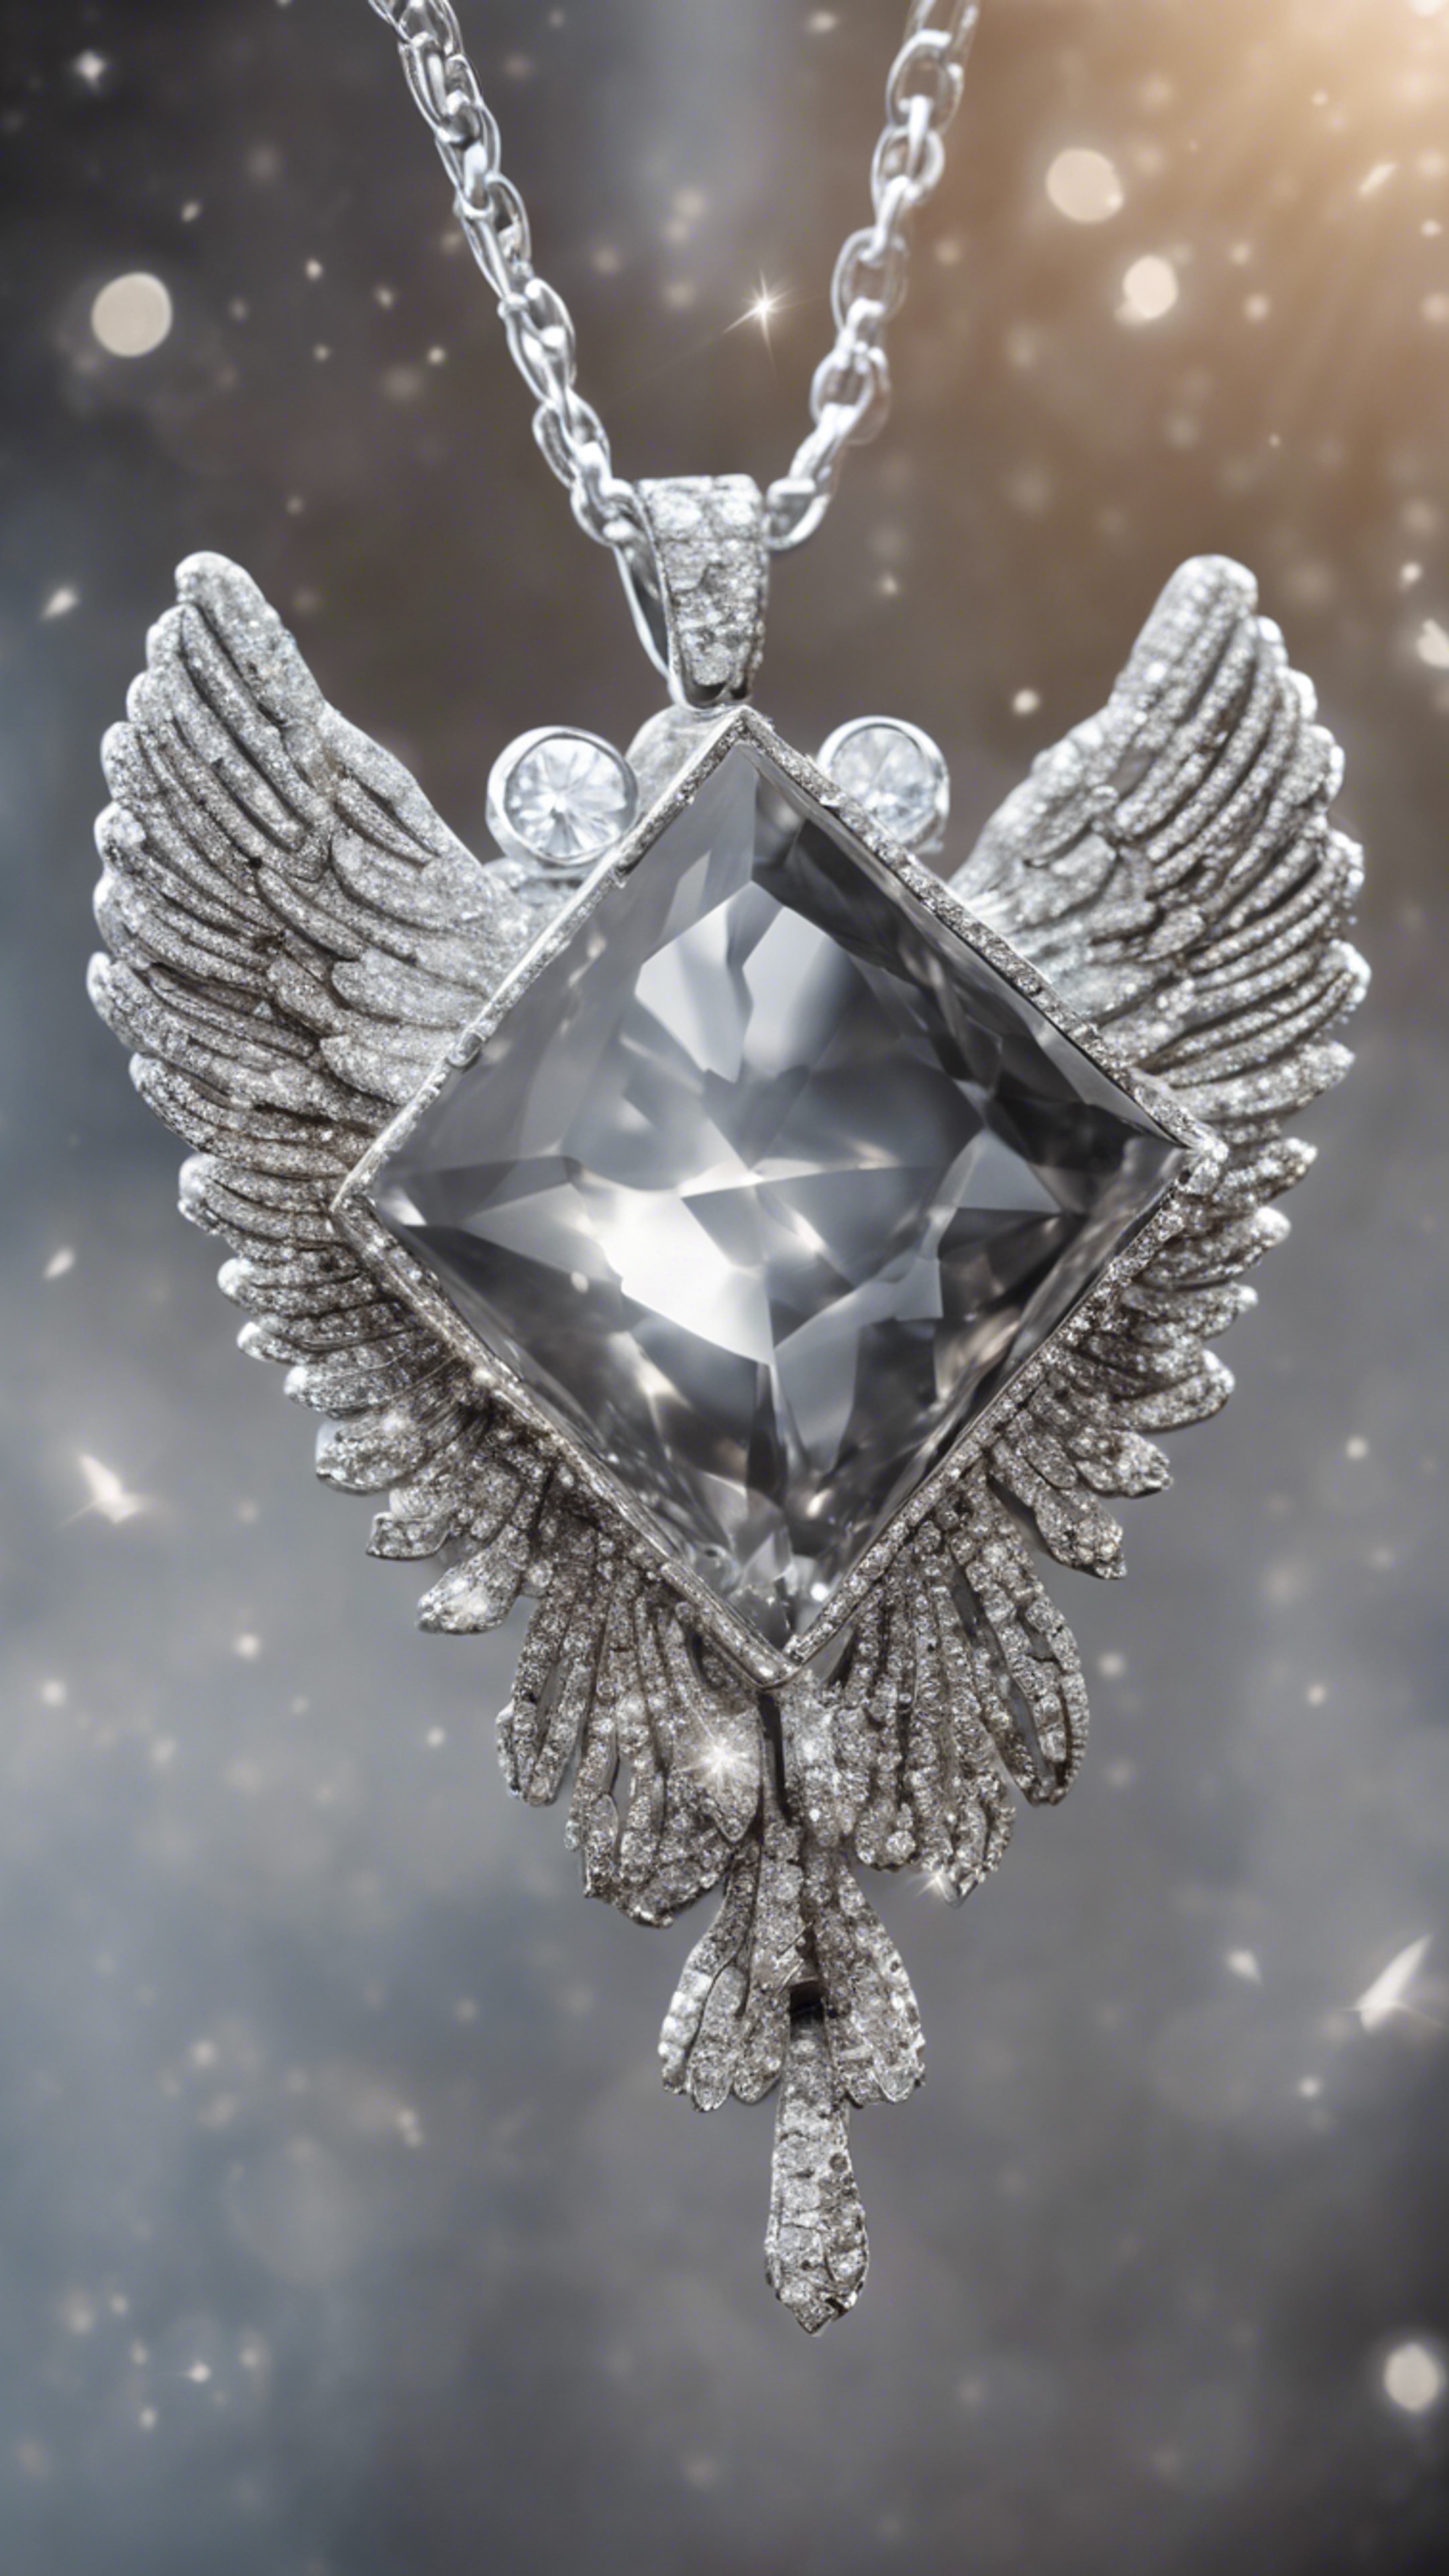 A gray diamond wrapped in the wings of a silver angel pendant. Валлпапер[ad1b9e387c144e34b8b5]